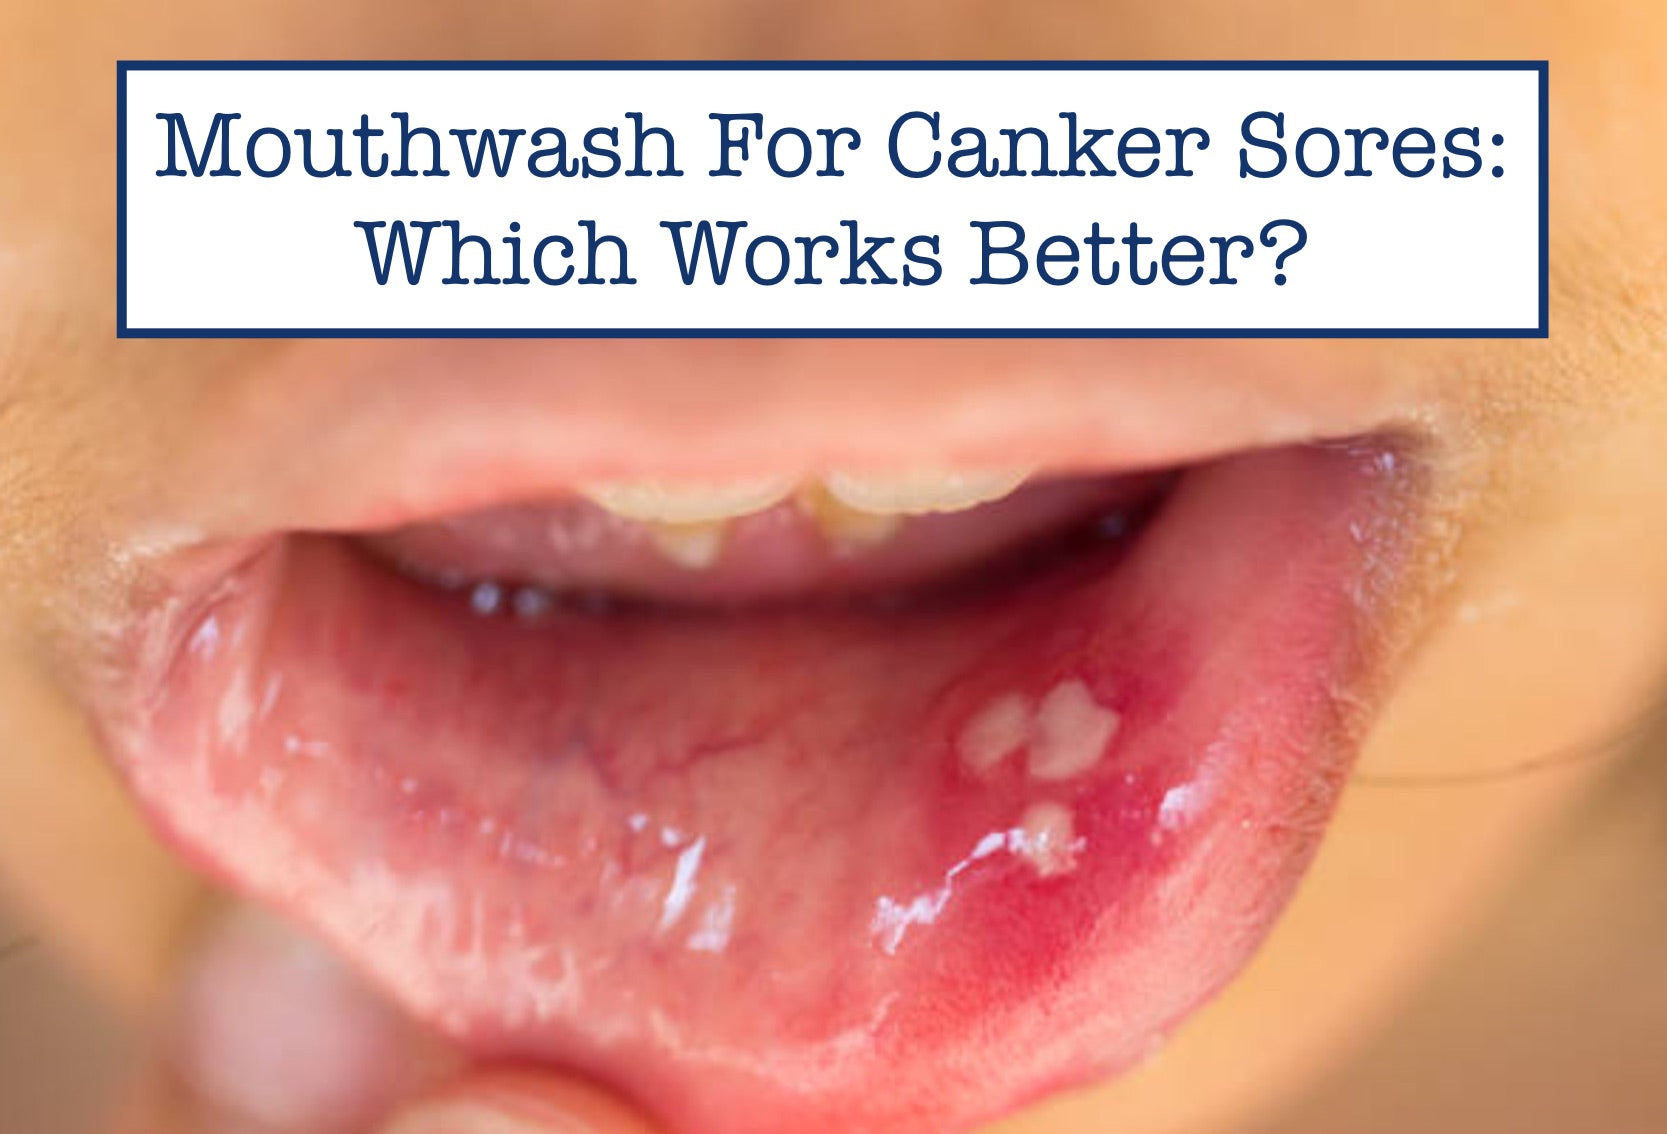 Mouthwash For Canker Sores: Which Works Better?